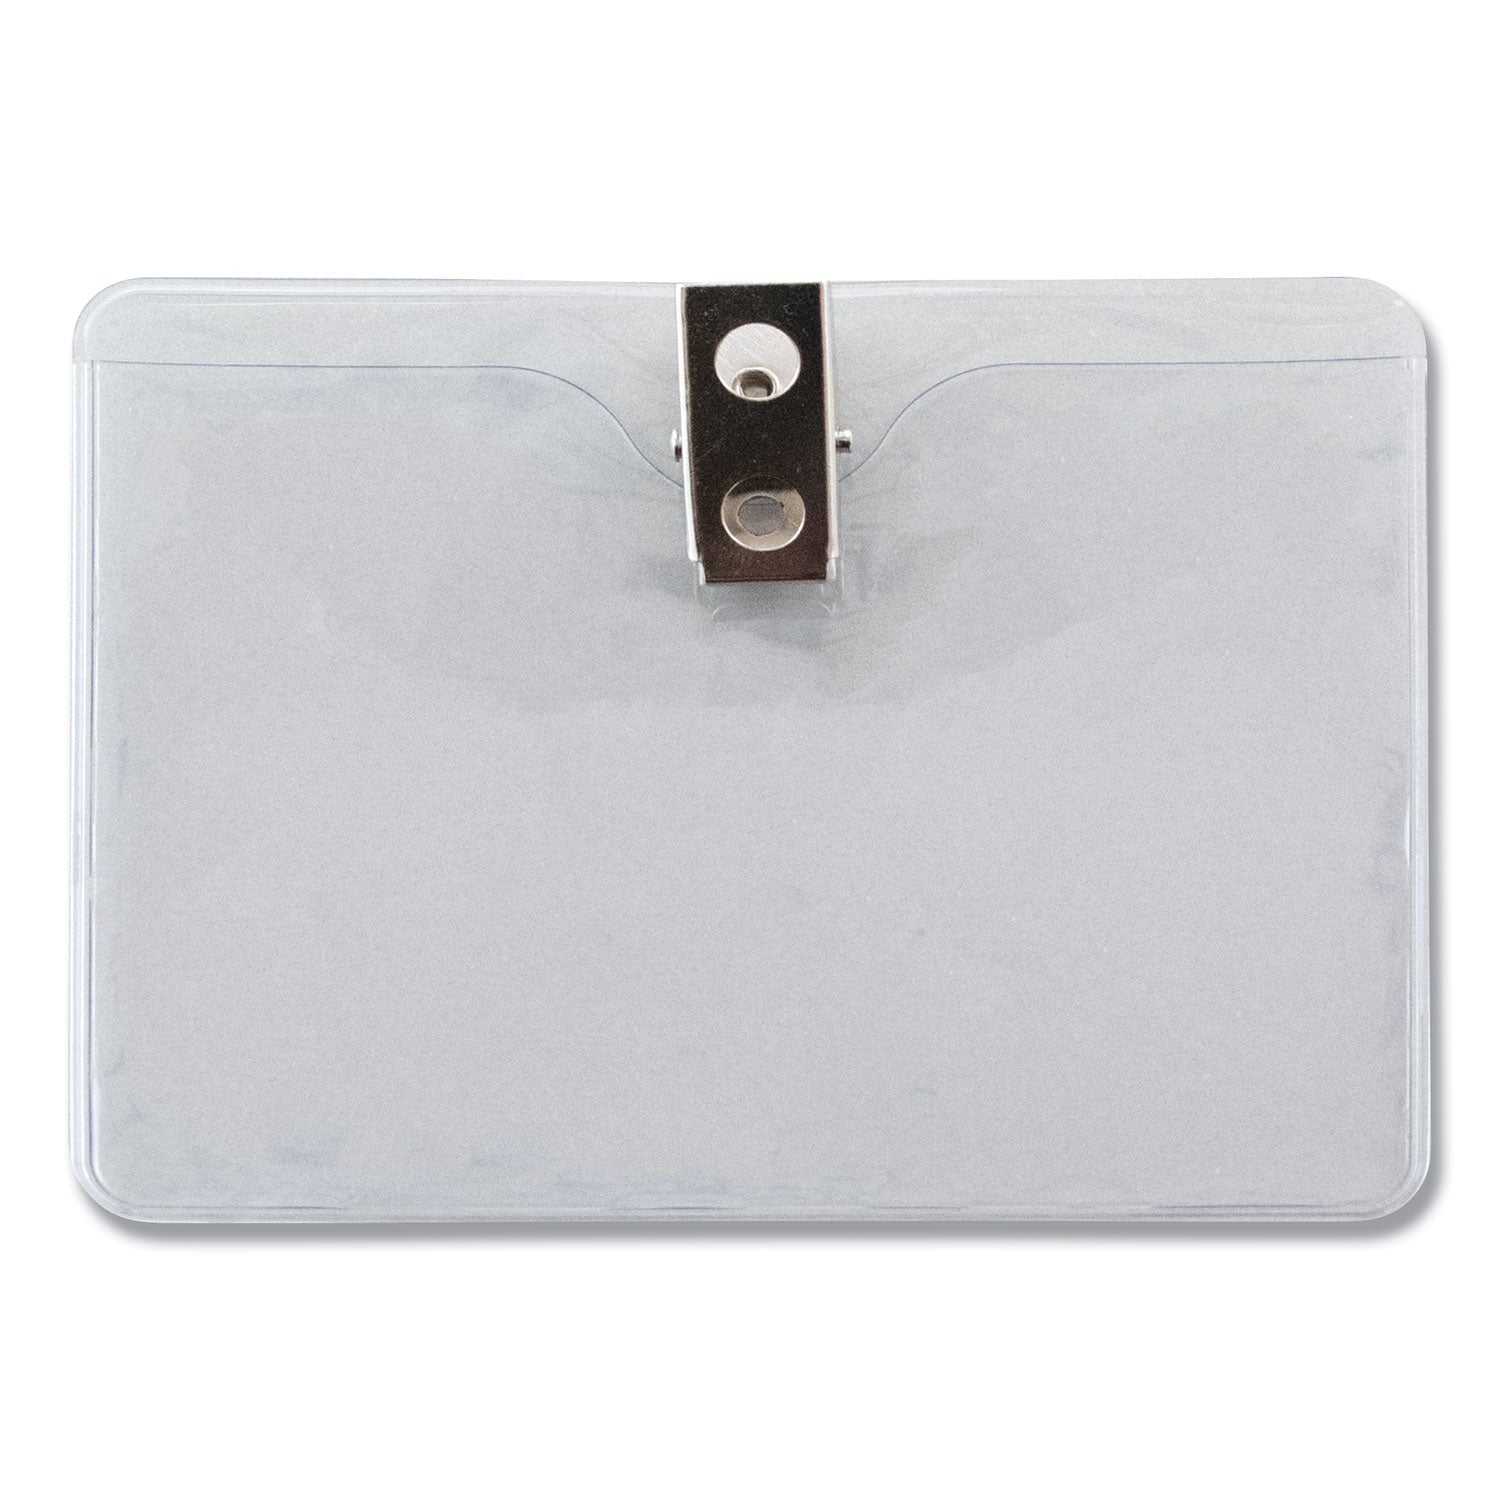 ID Badge Holders with Clip, Horizontal, Clear 4.13" x 3.38" Holder, 3.75" x 2.75" Insert, 50/Pack - 